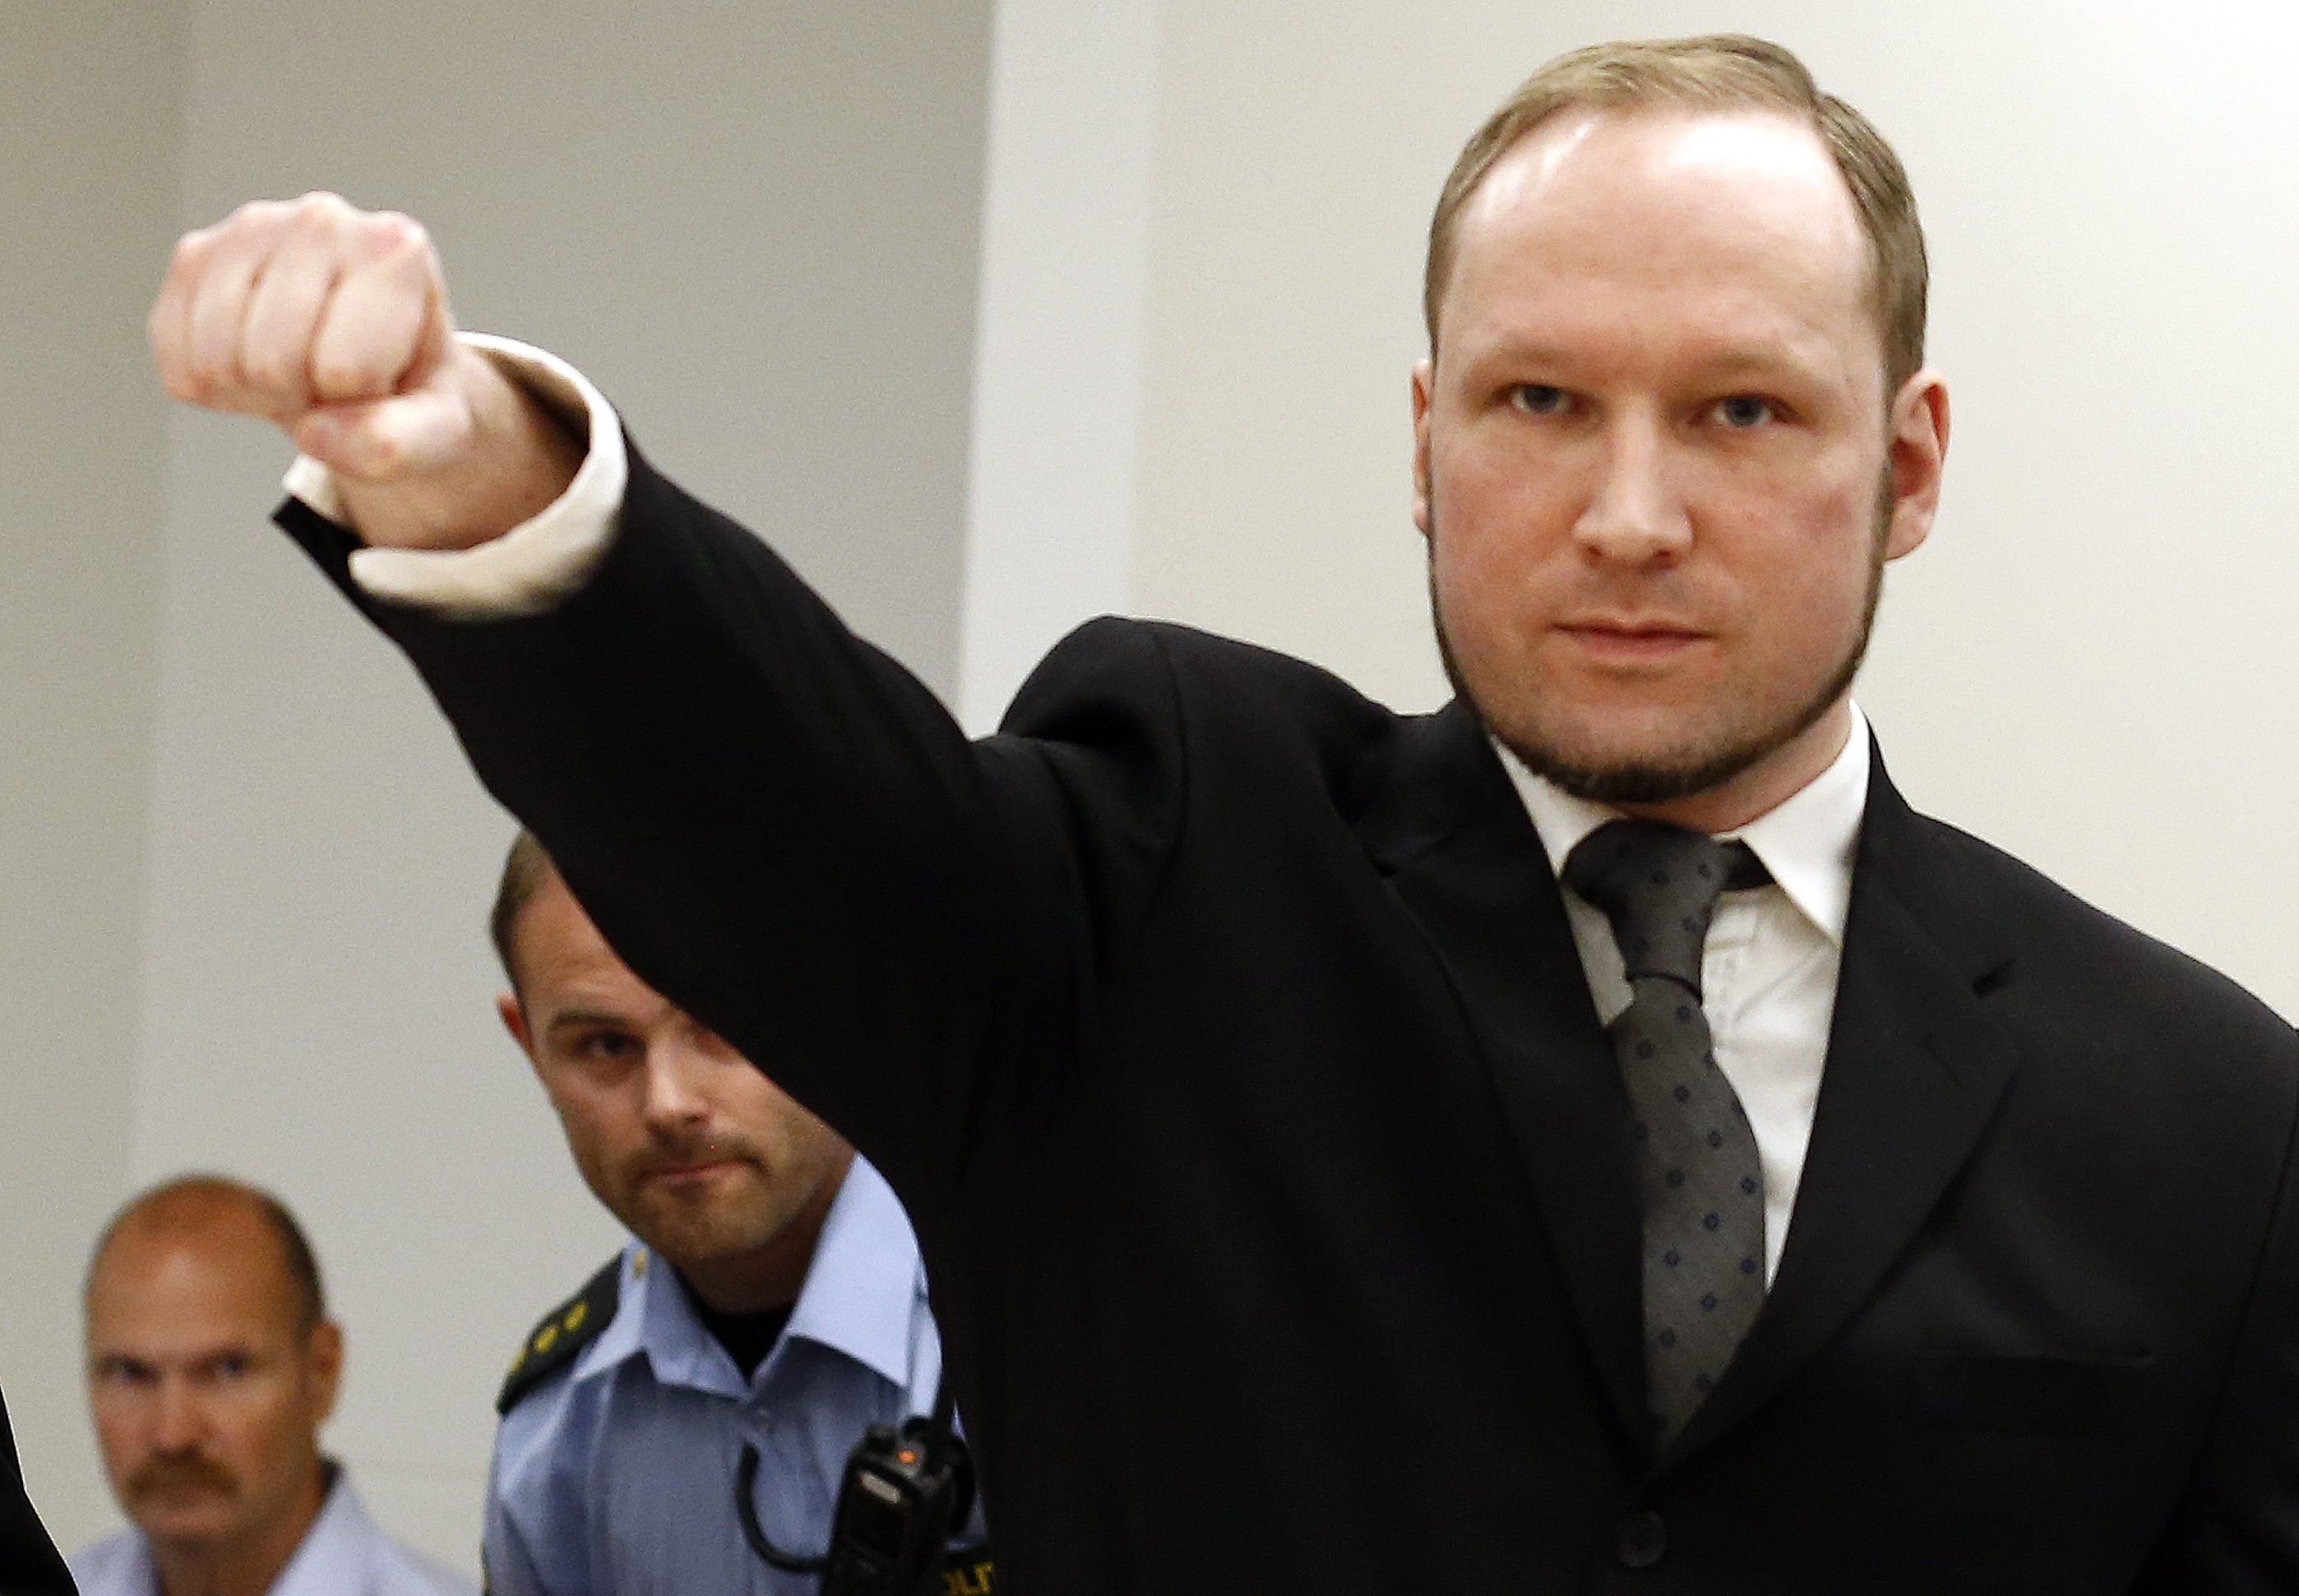 mass-murderer-anders-breivik-wins-place-on-oslo-university-course